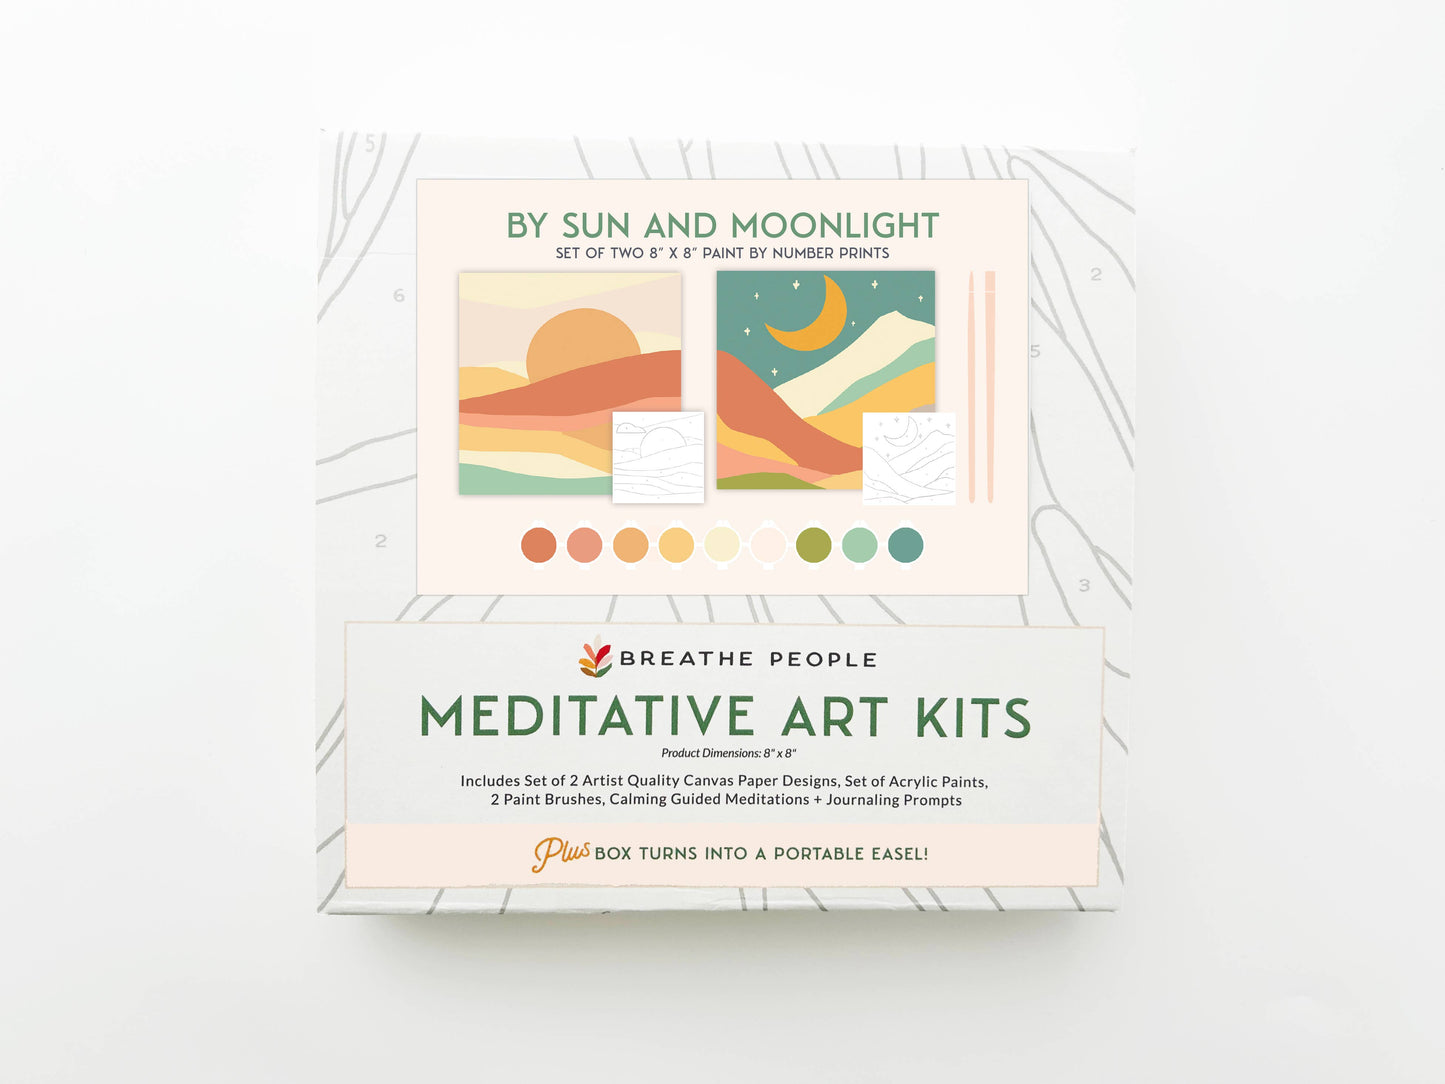 Sun + Moonlight Paint by Number Kit